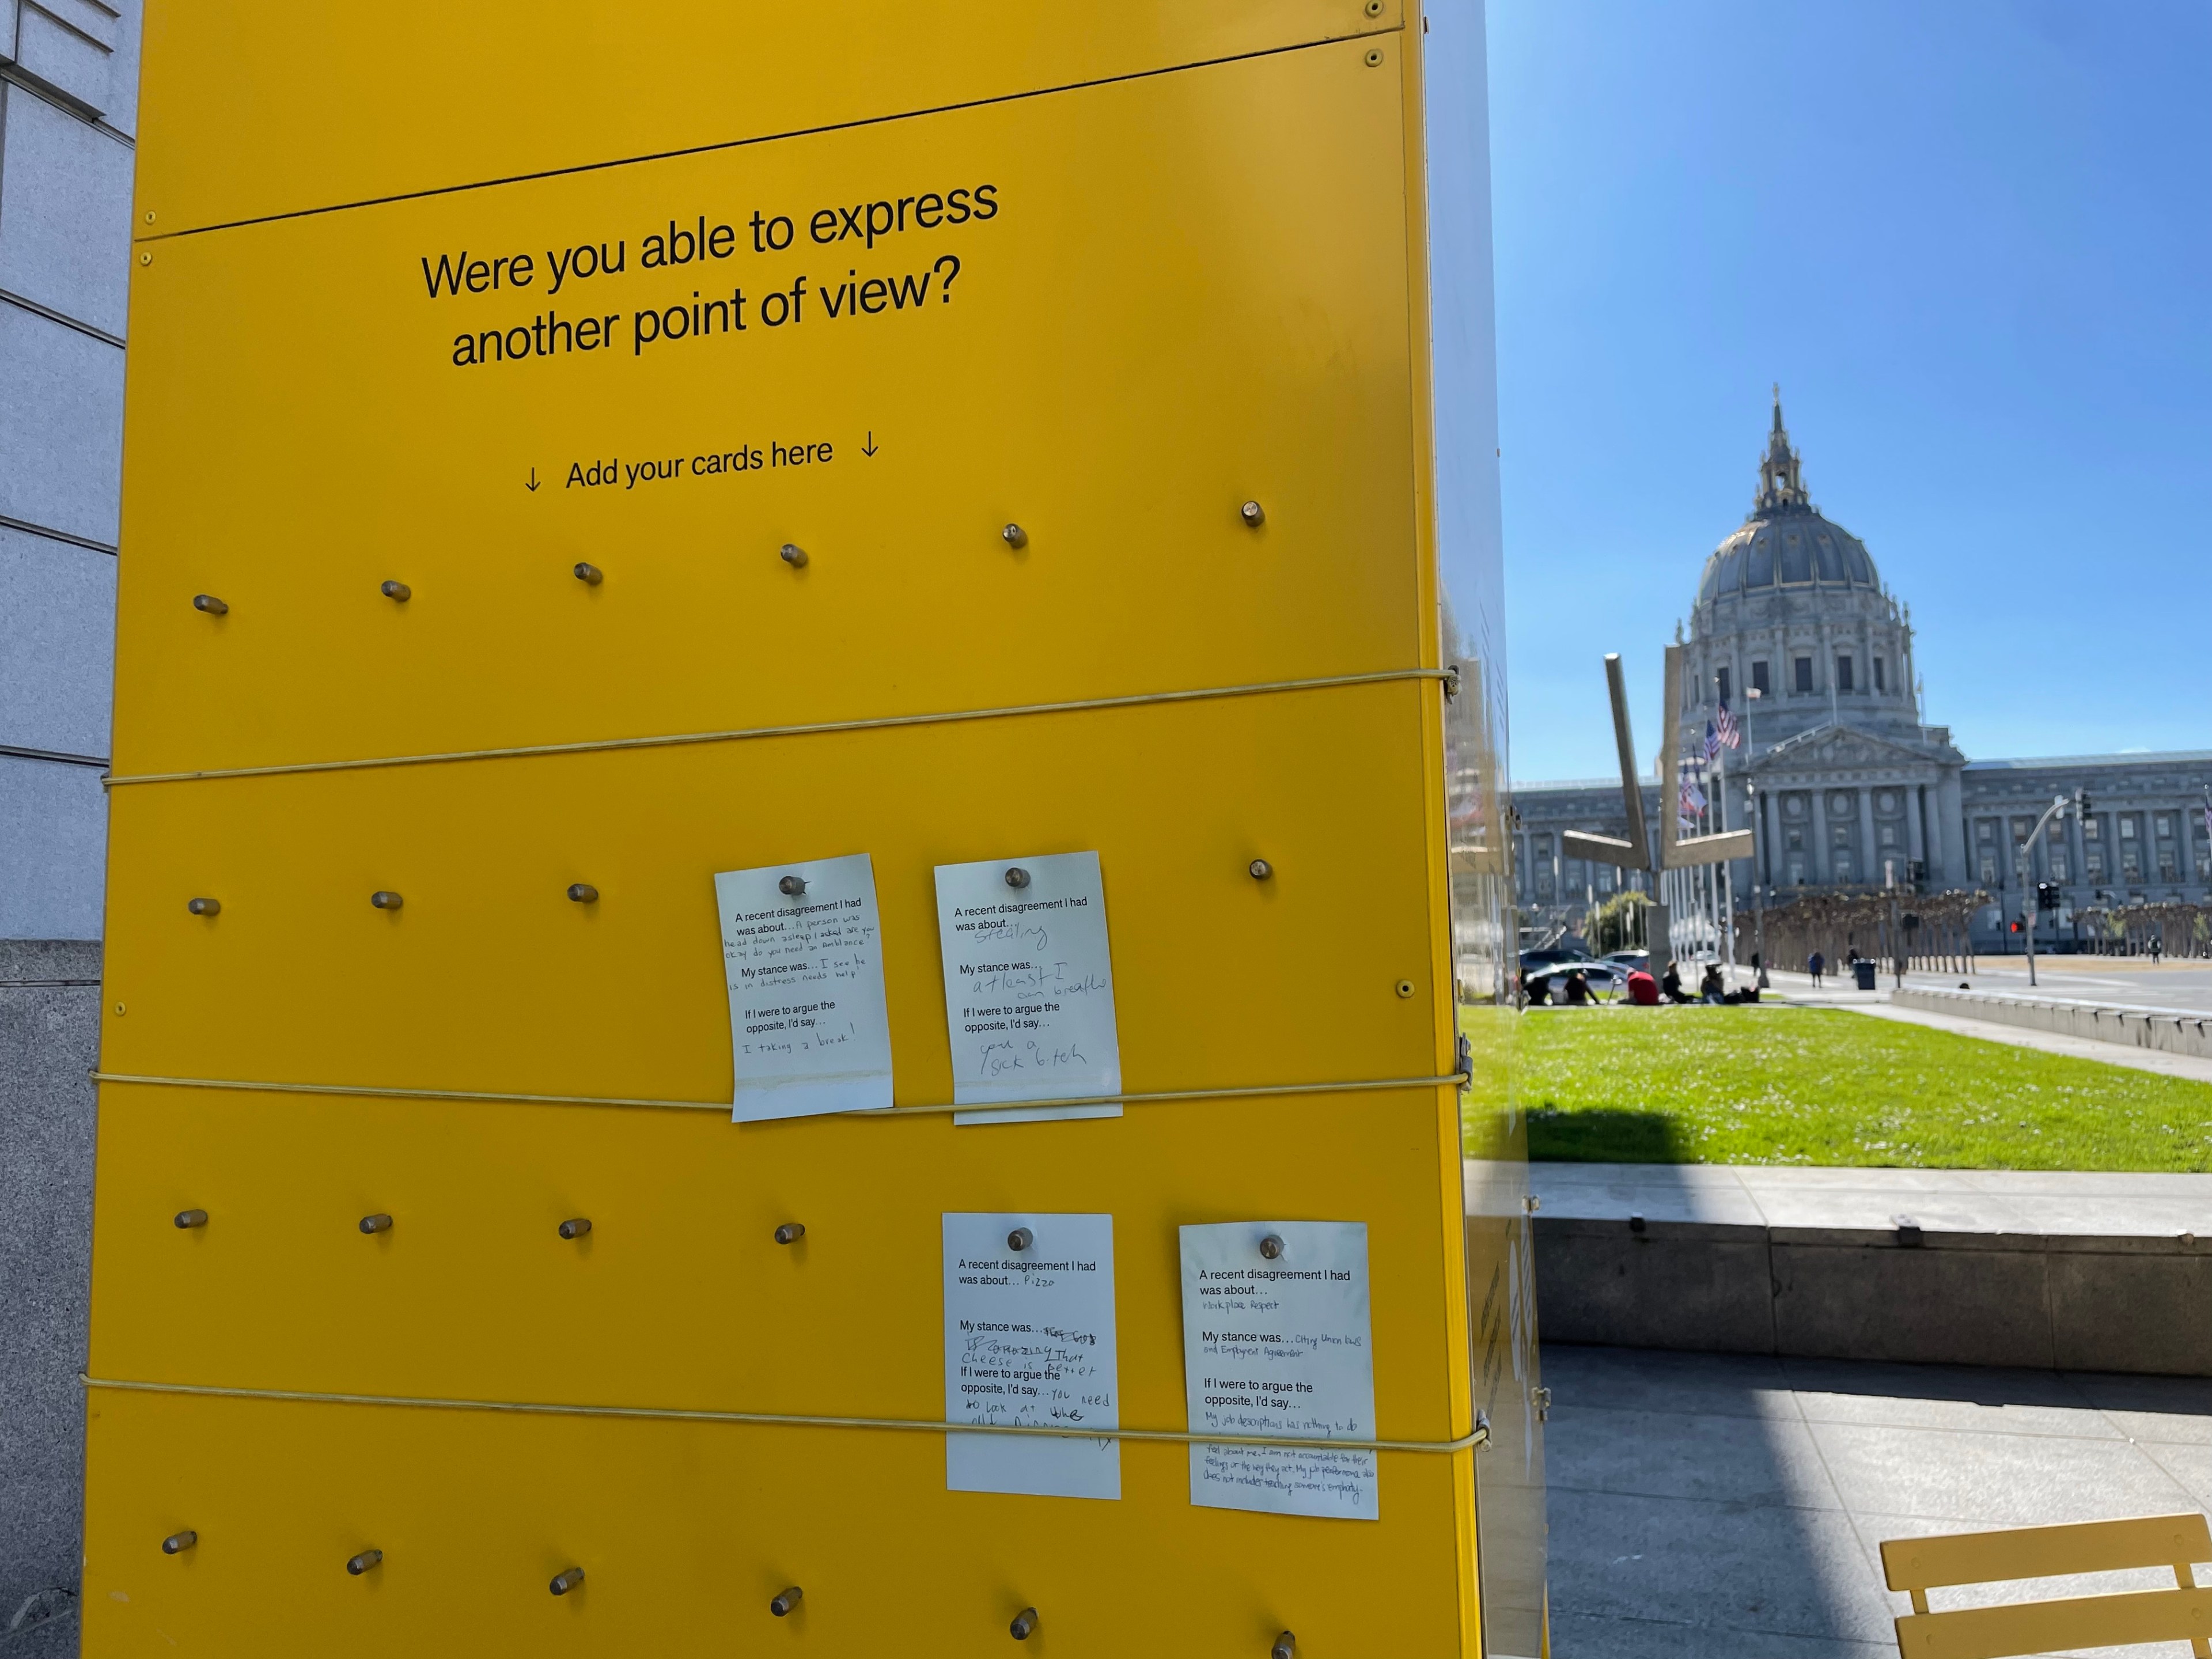 A yellow board with notes asking about expressing points of view, with a grand building and a clear sky in the background.